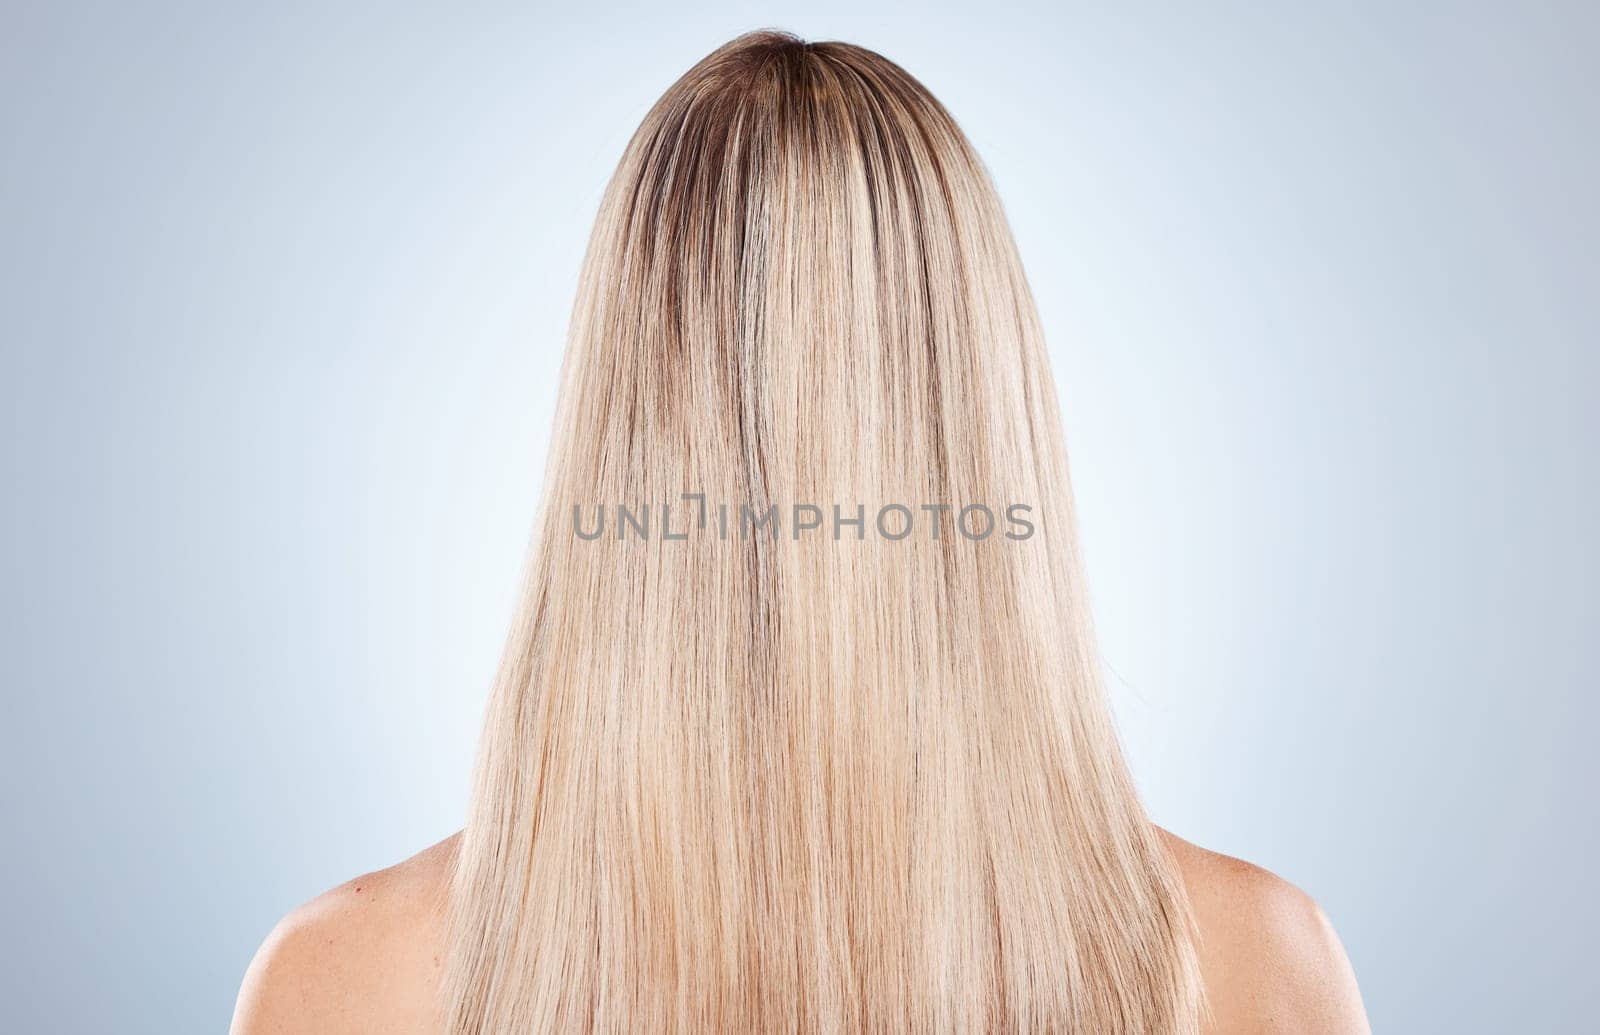 Hair care, woman and back for natural beauty, keratin and luxury against grey studio background. Mockup, female and lady with smooth hair, texture and wellness for hairstyle treatment and shine